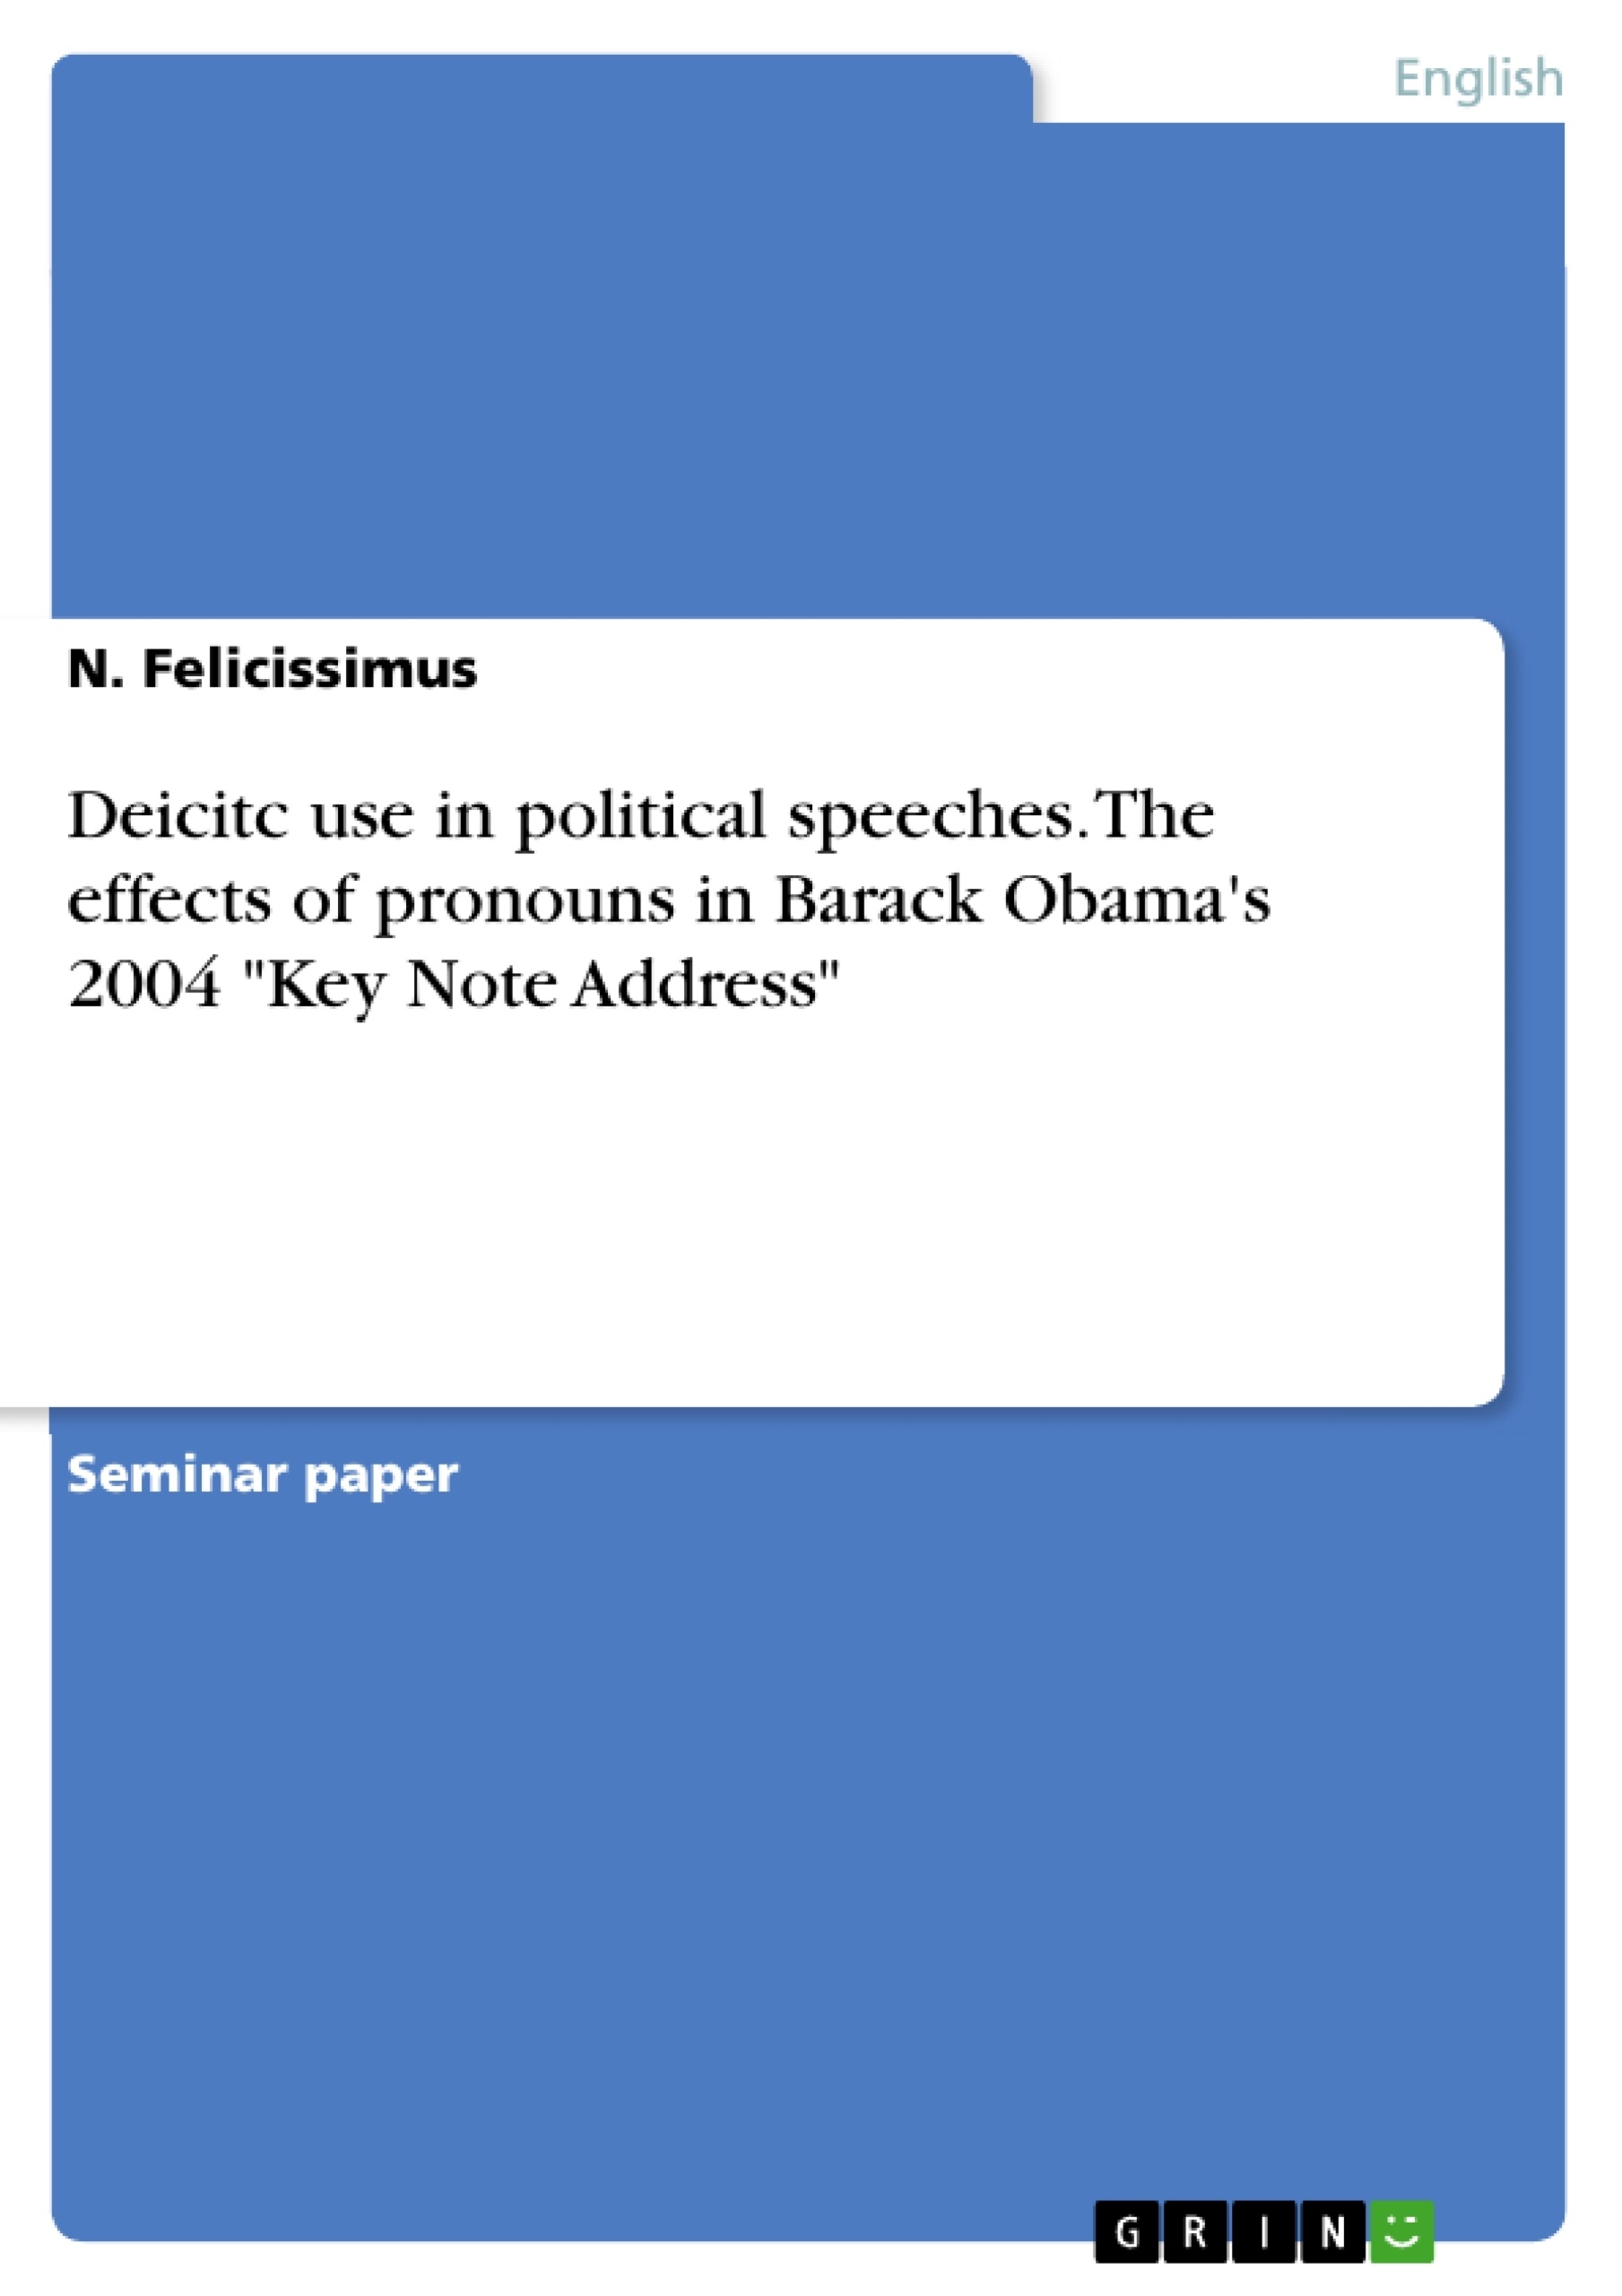 Title: Deicitc use in political speeches. The effects of pronouns in Barack Obama's 2004 "Key Note Address"